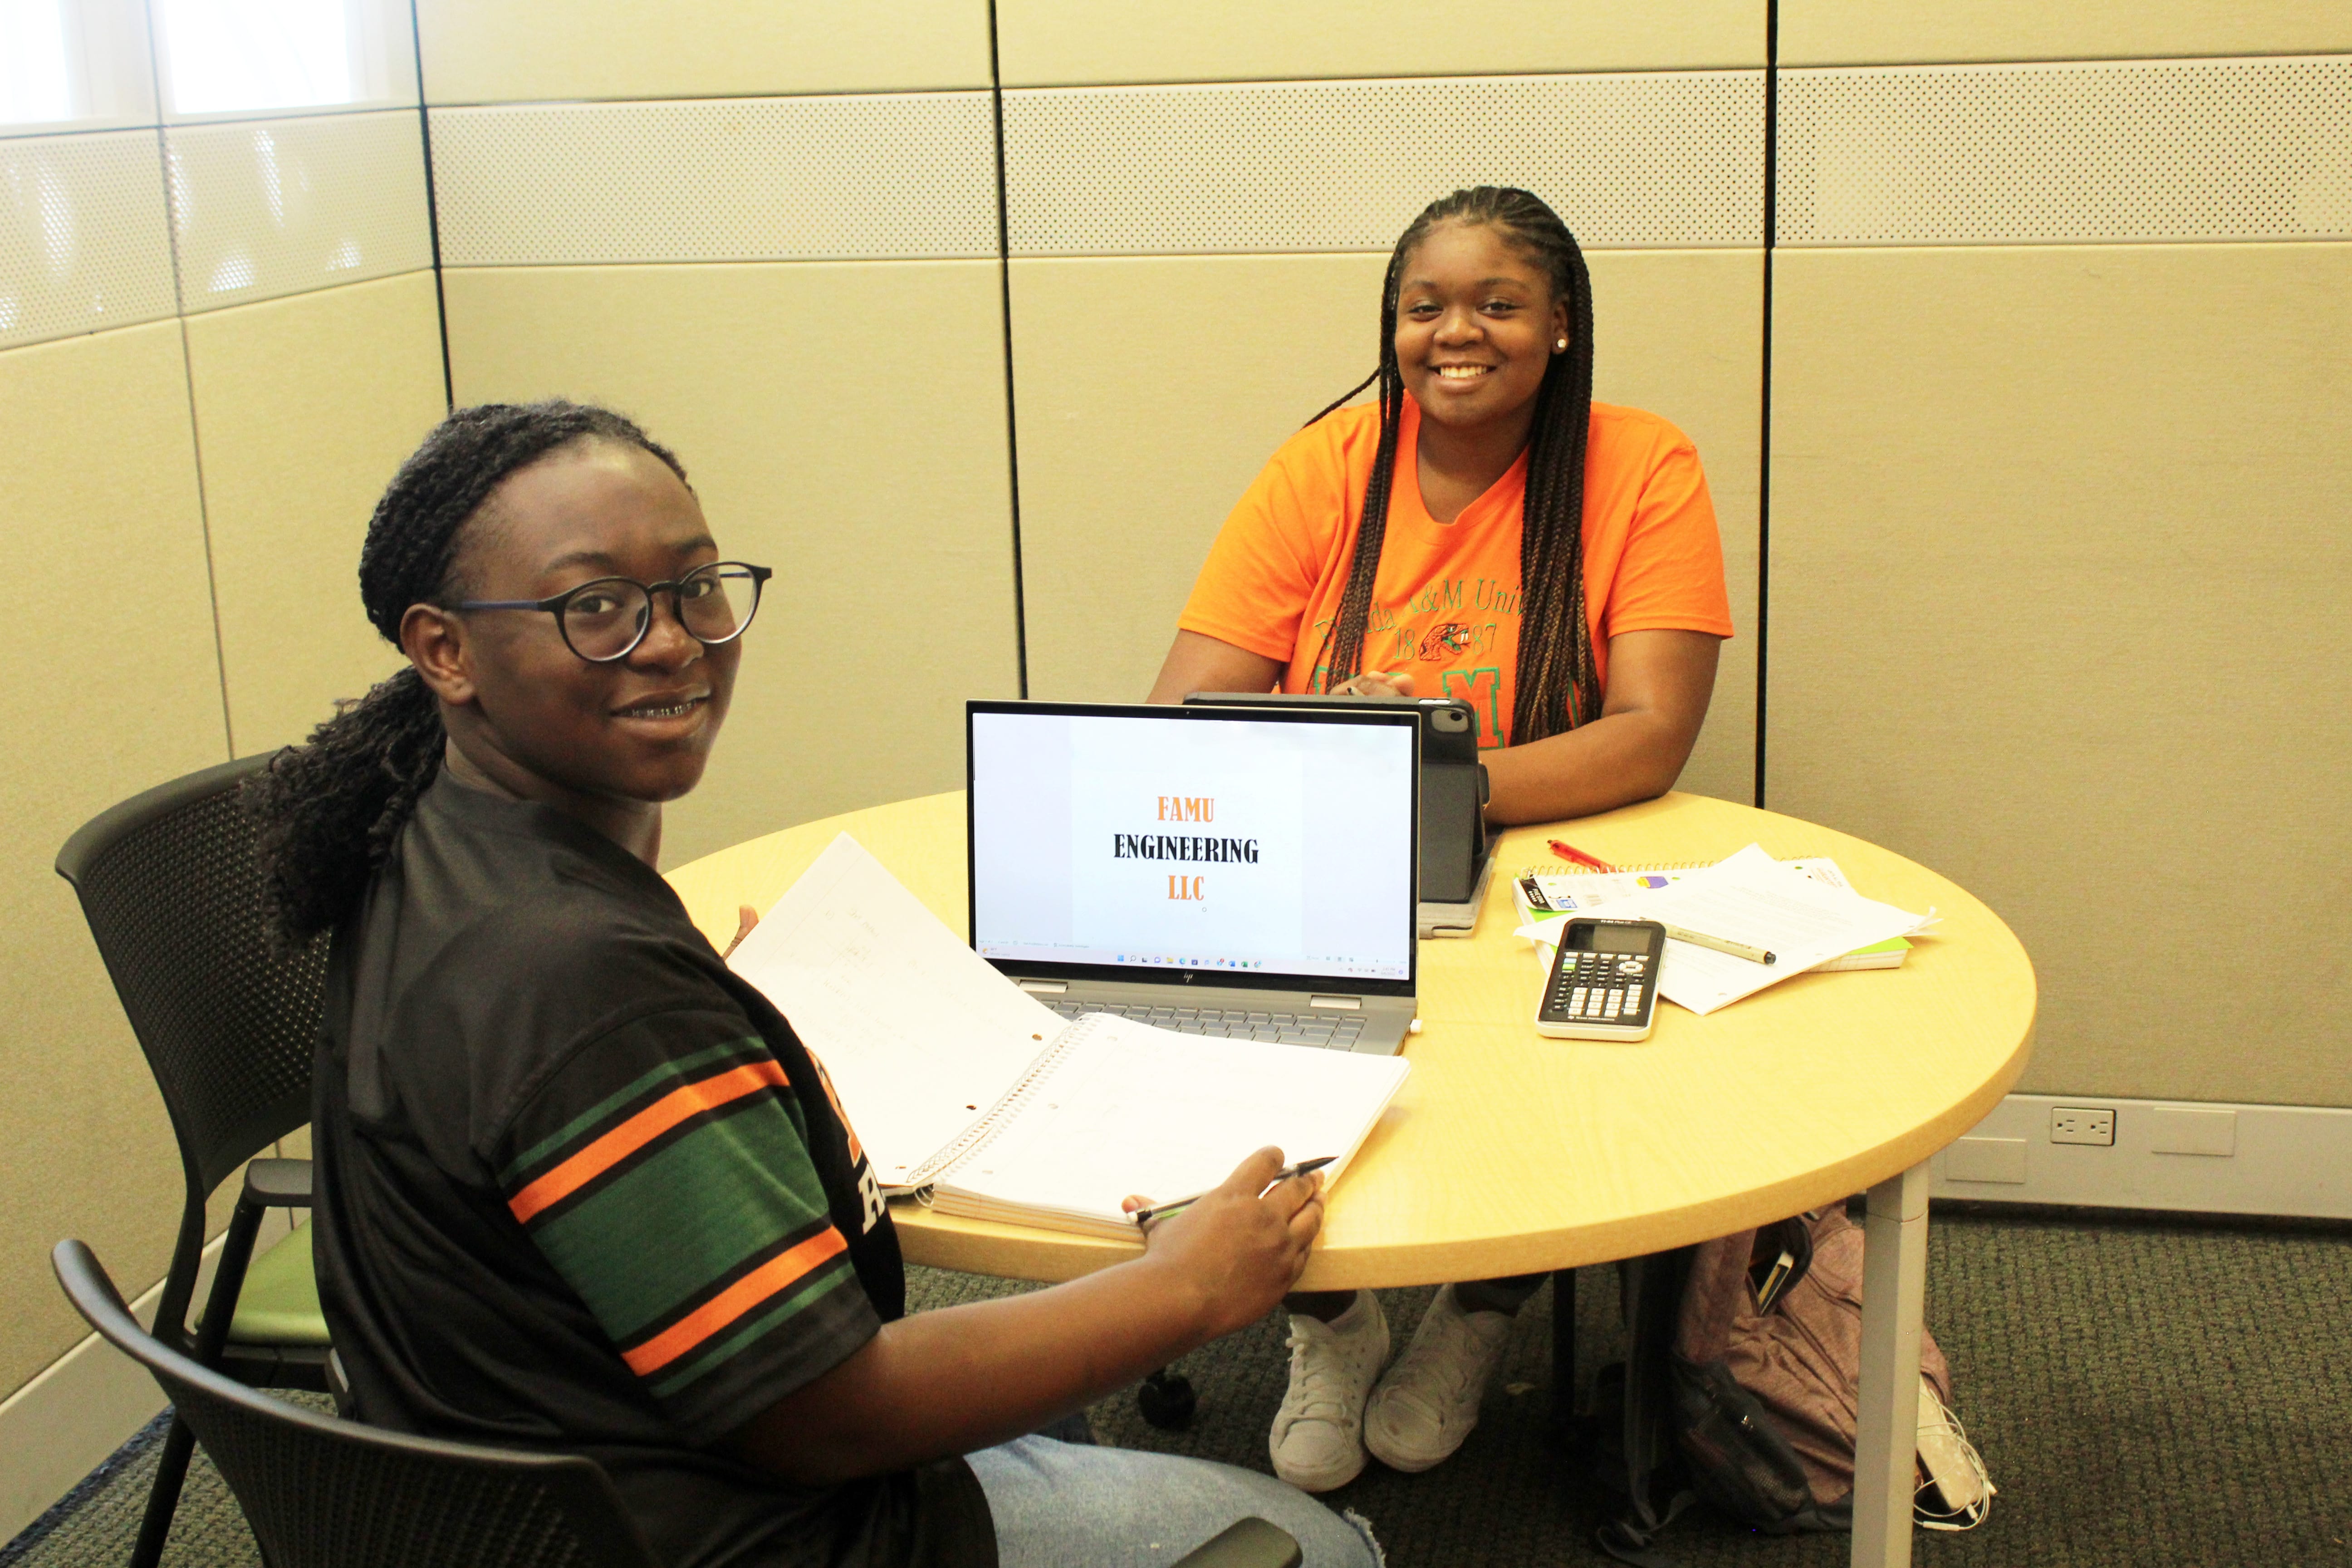 The FAMU Engineering LLC upholds the standard of cultivating and equipping its first-year engineering college students with the tools needed to succeed in every aspect of college, engineering, and the workforce.  image